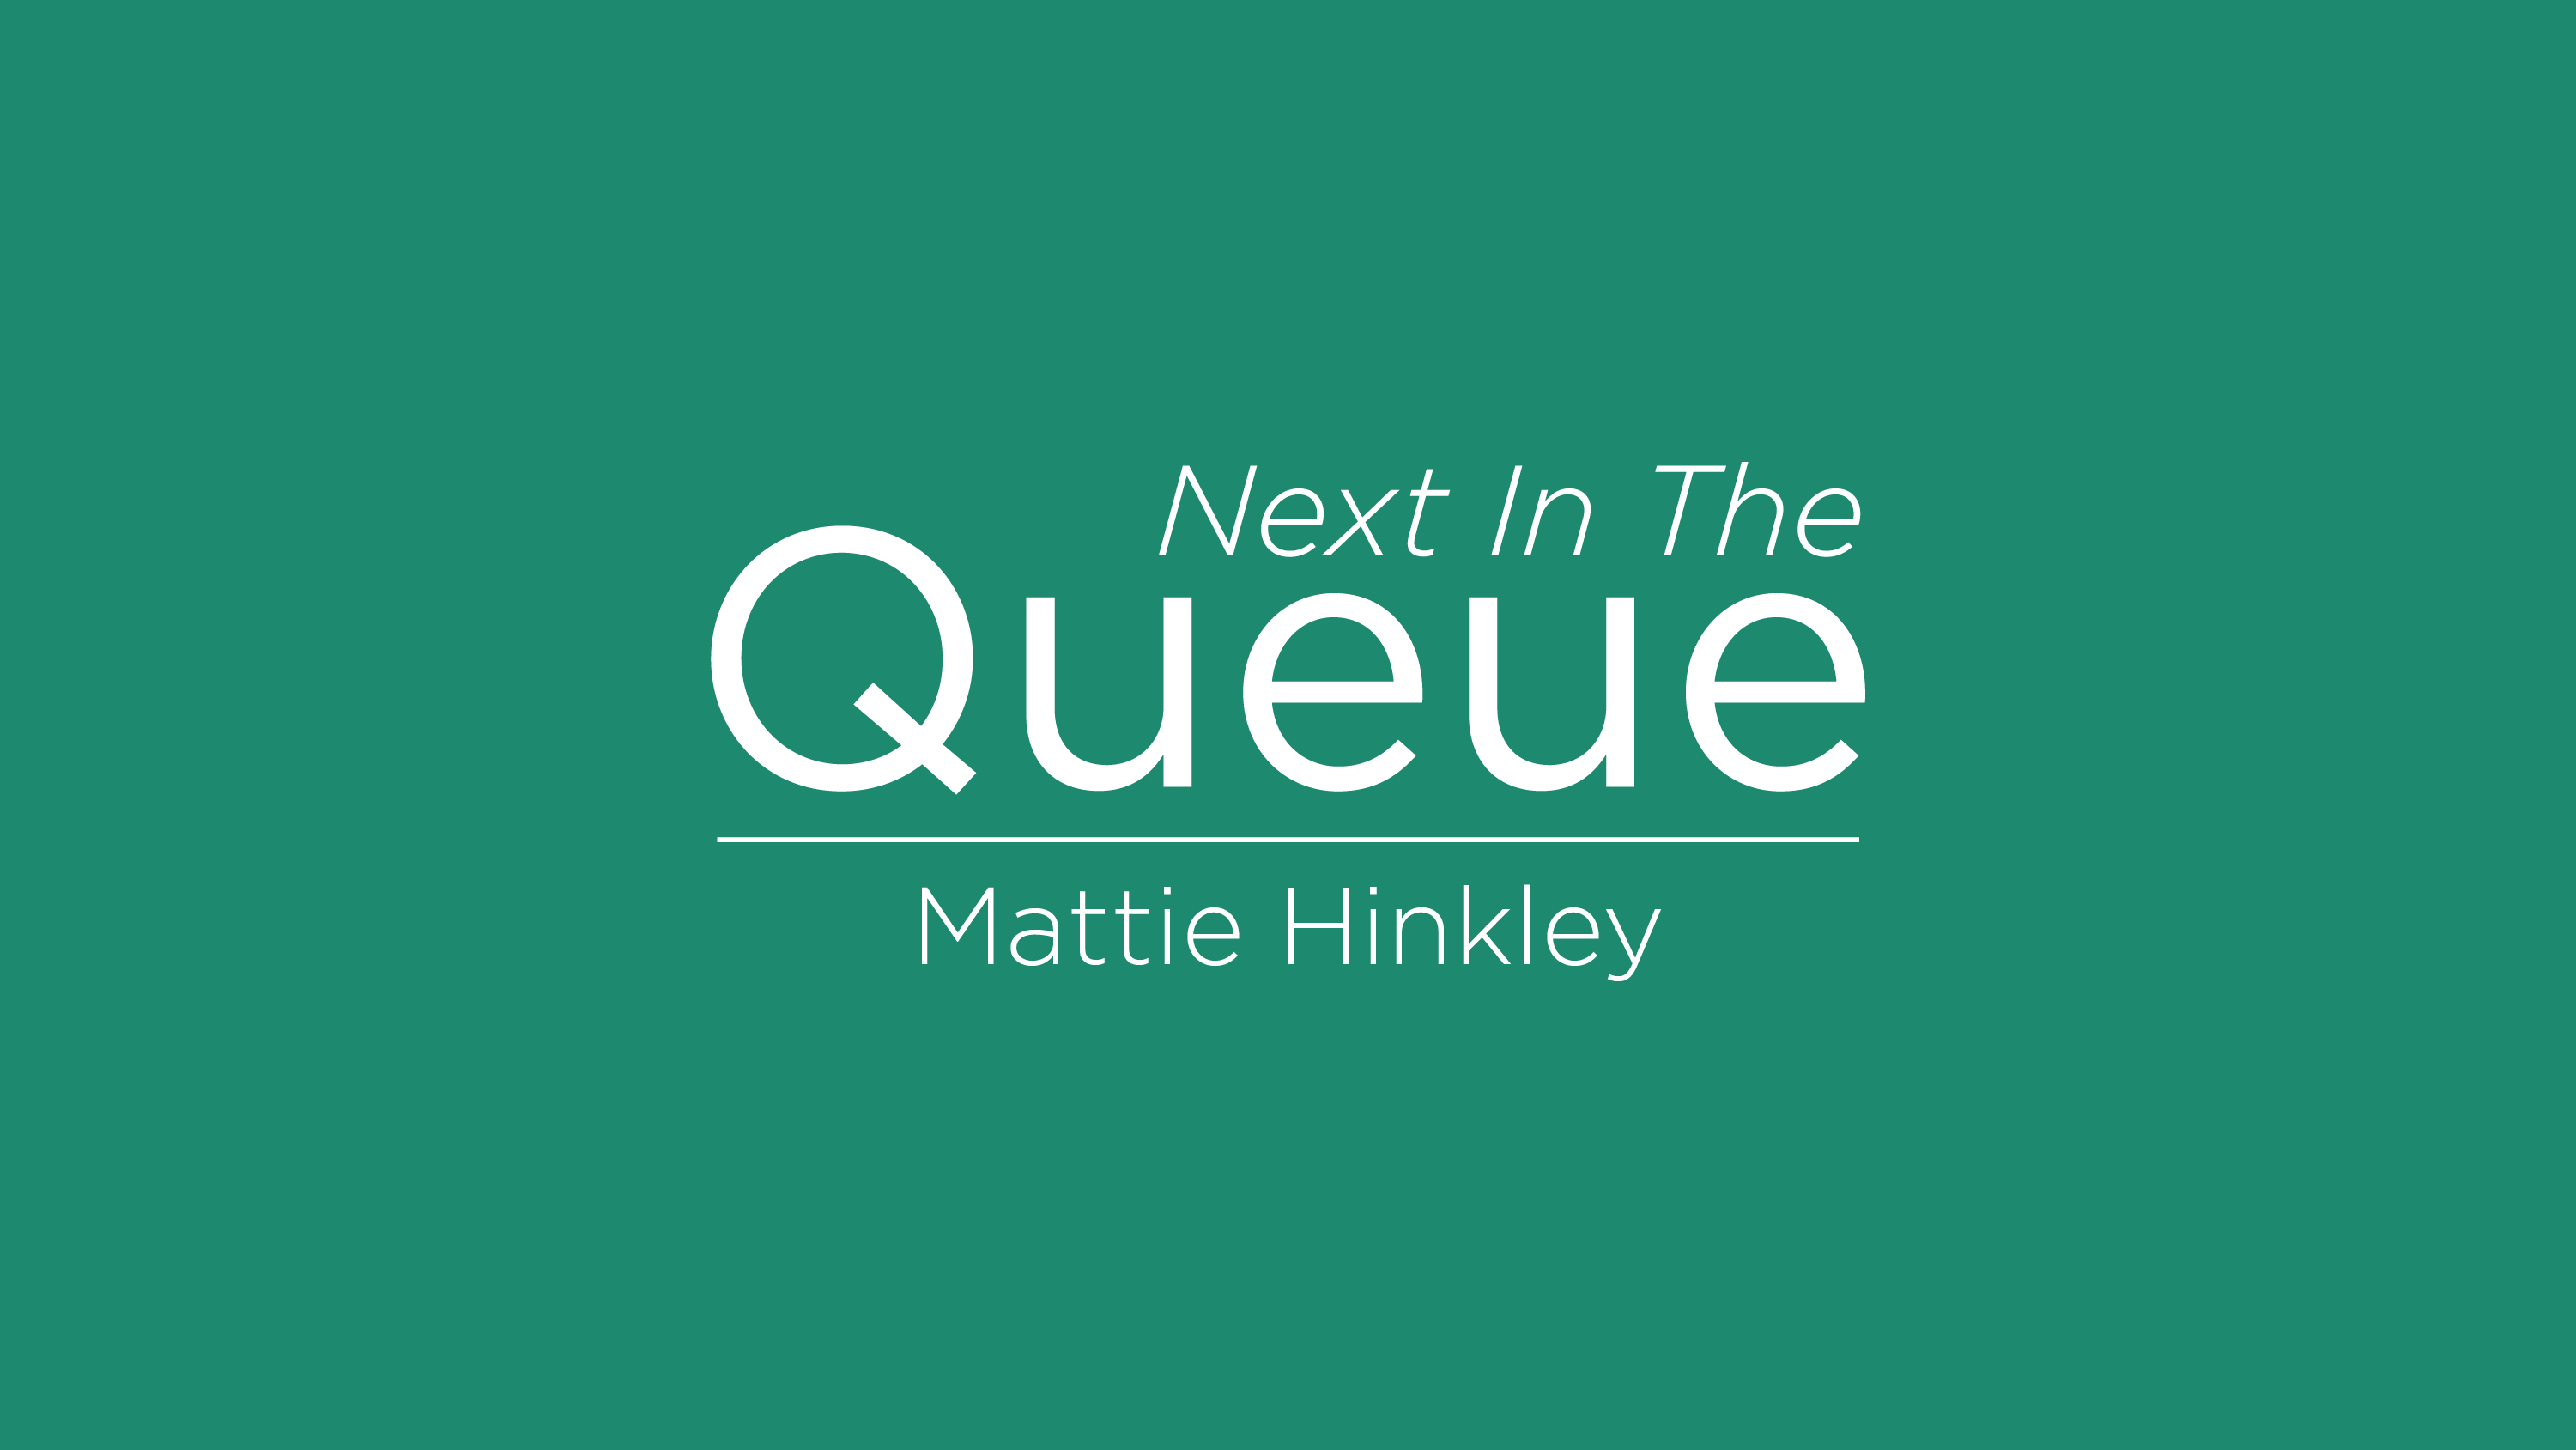 Blog post cover graphic for The Queue featuring Mattie Hinkley